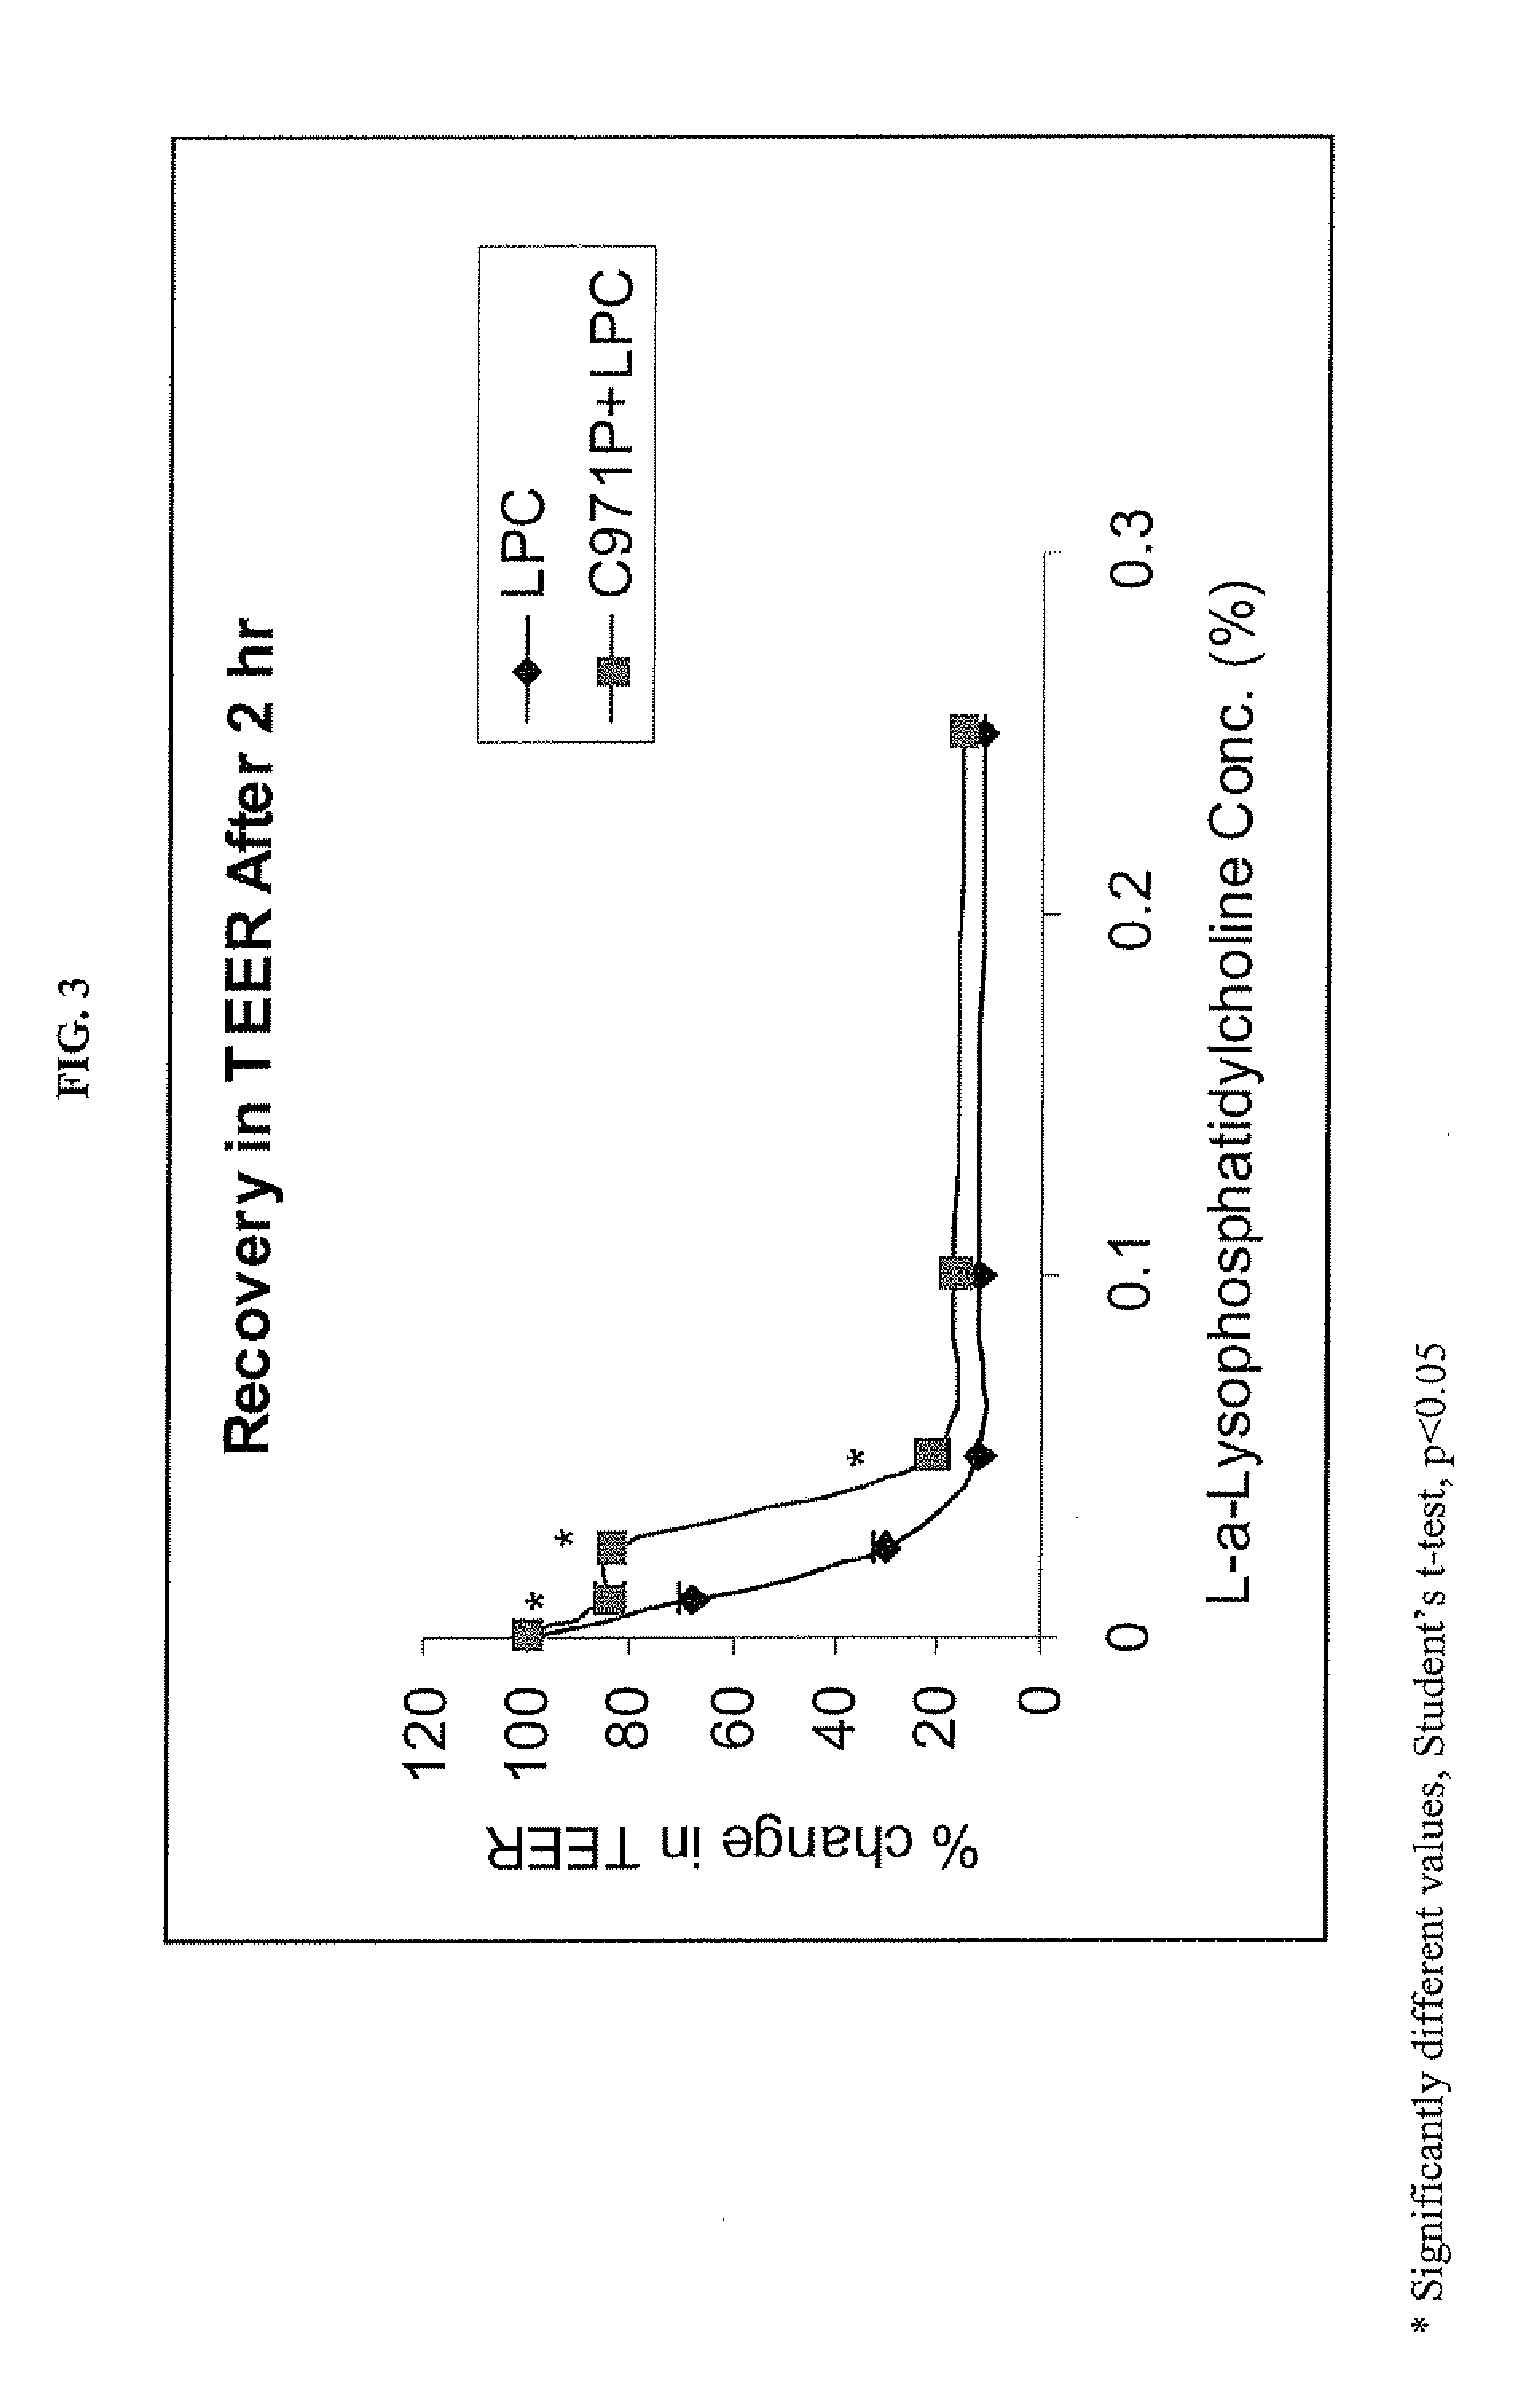 Composition for enhancing absorption of a drug and method